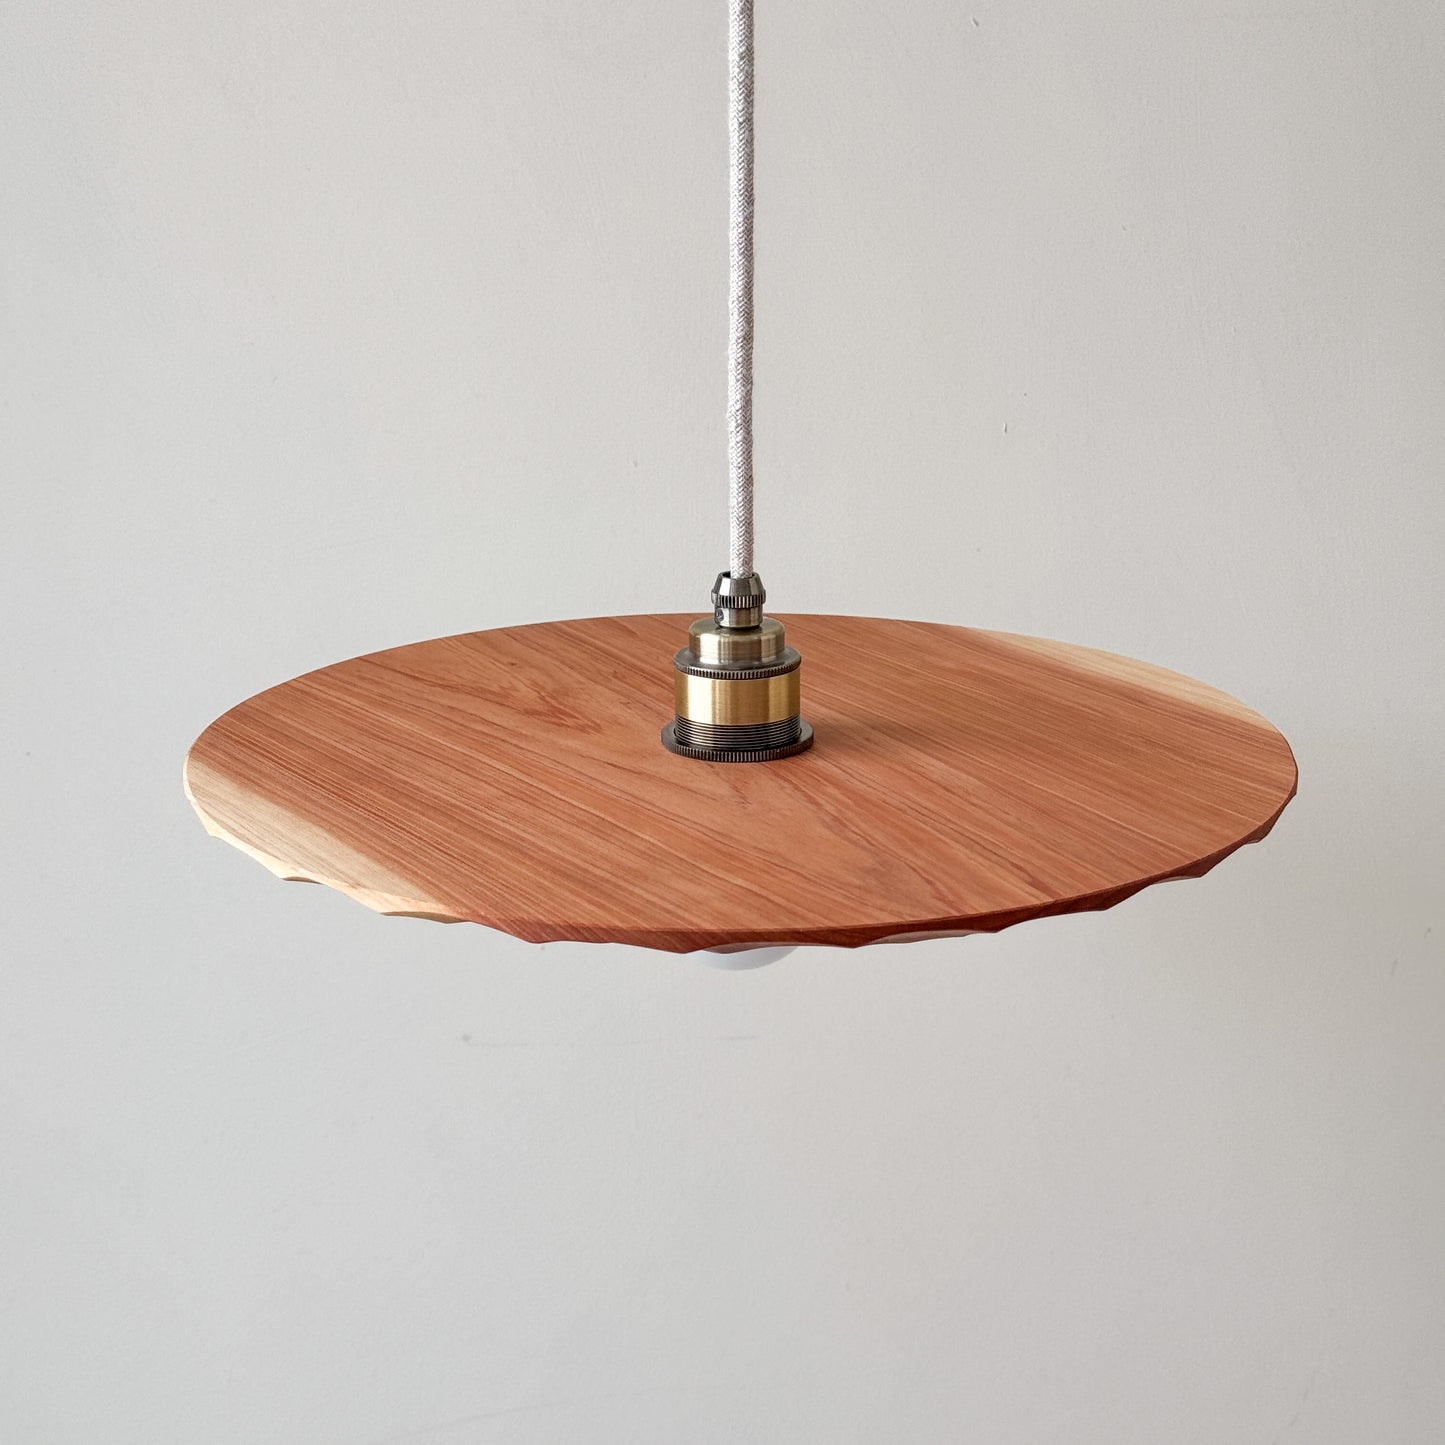 "There is no light without shadow" | Cedar Ceiling Lamp